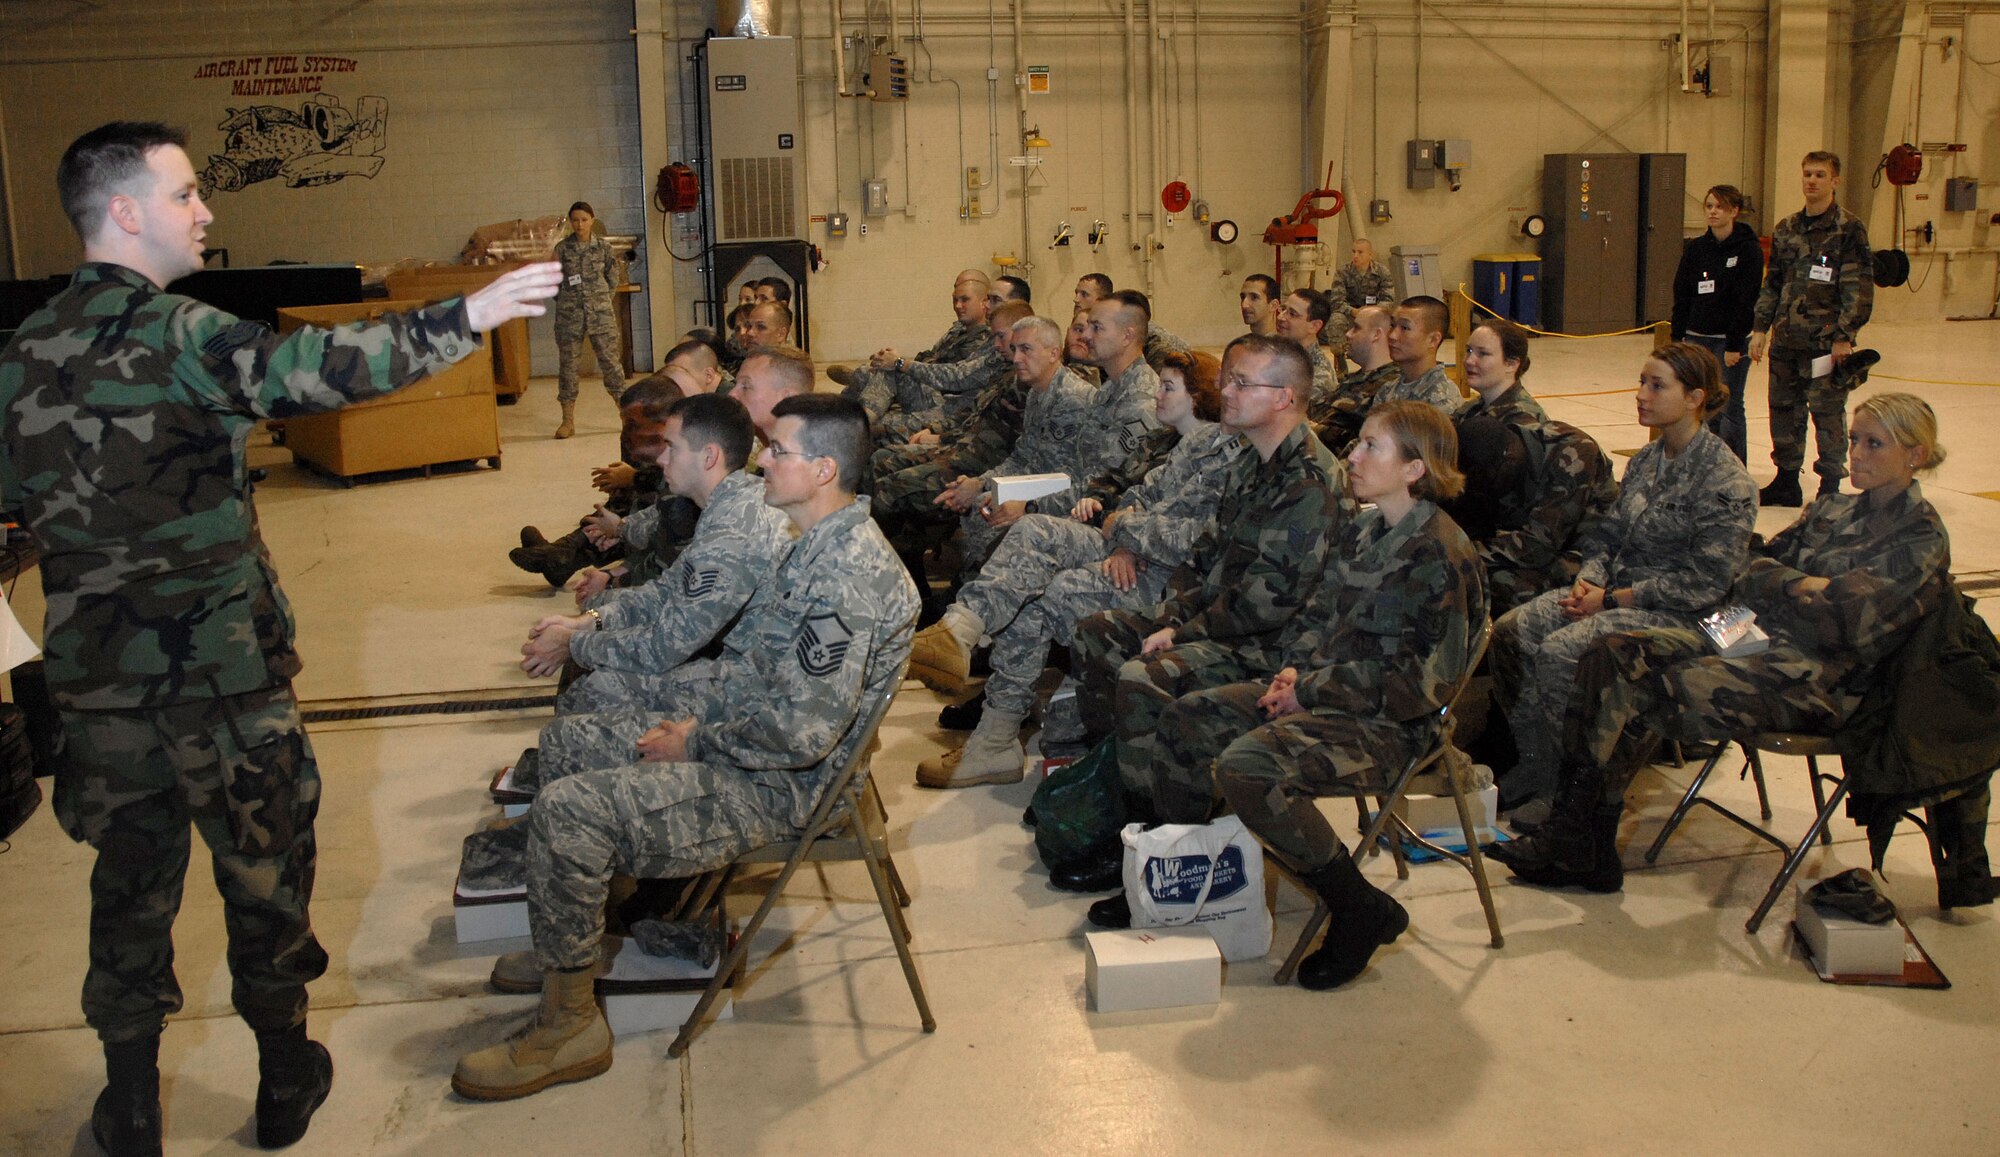 Staff Sgt. Ken Gordon gives a pre-deployment brief to deploying members at the 110th Fighter Wing, Battle Creek, Mi., Nov. 7, 2009. Gordon was participating in a mobility training exercise at the base. (U.S. Air Force photo by Tech. Sgt. David Eichaker/released)